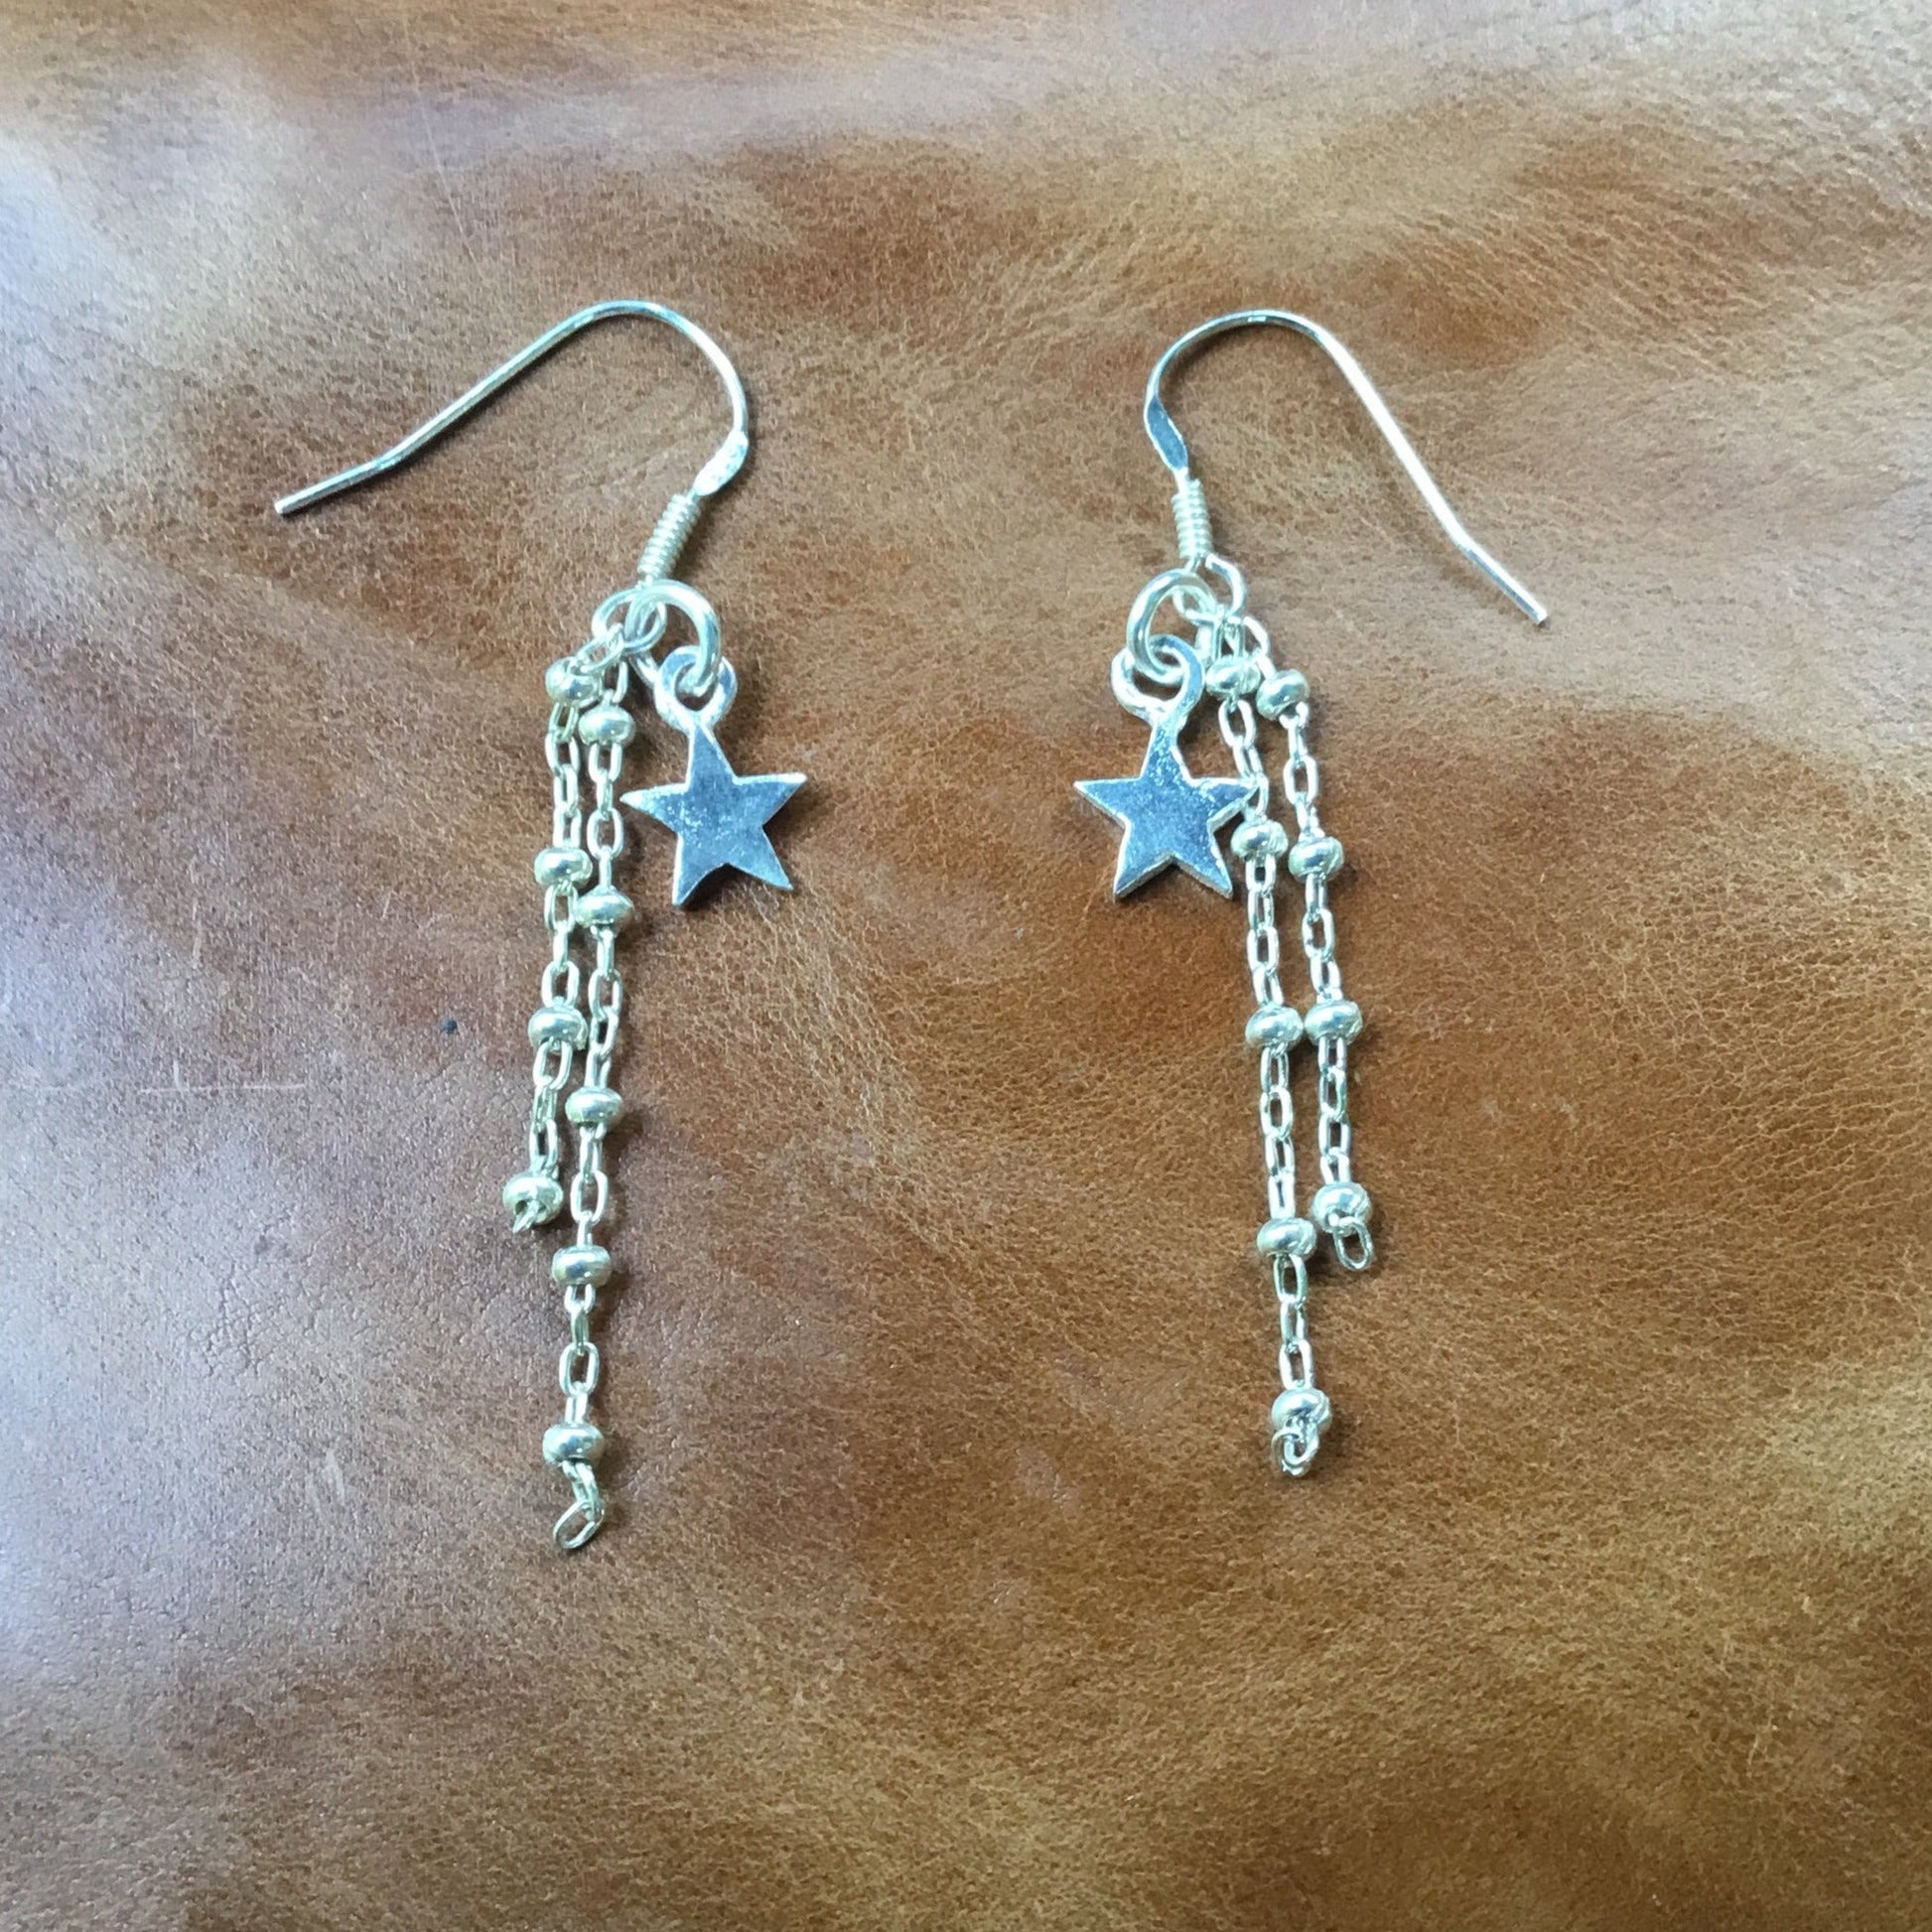 Earring Backs Perfect for Hook or Stud Earrings Silver Cover With